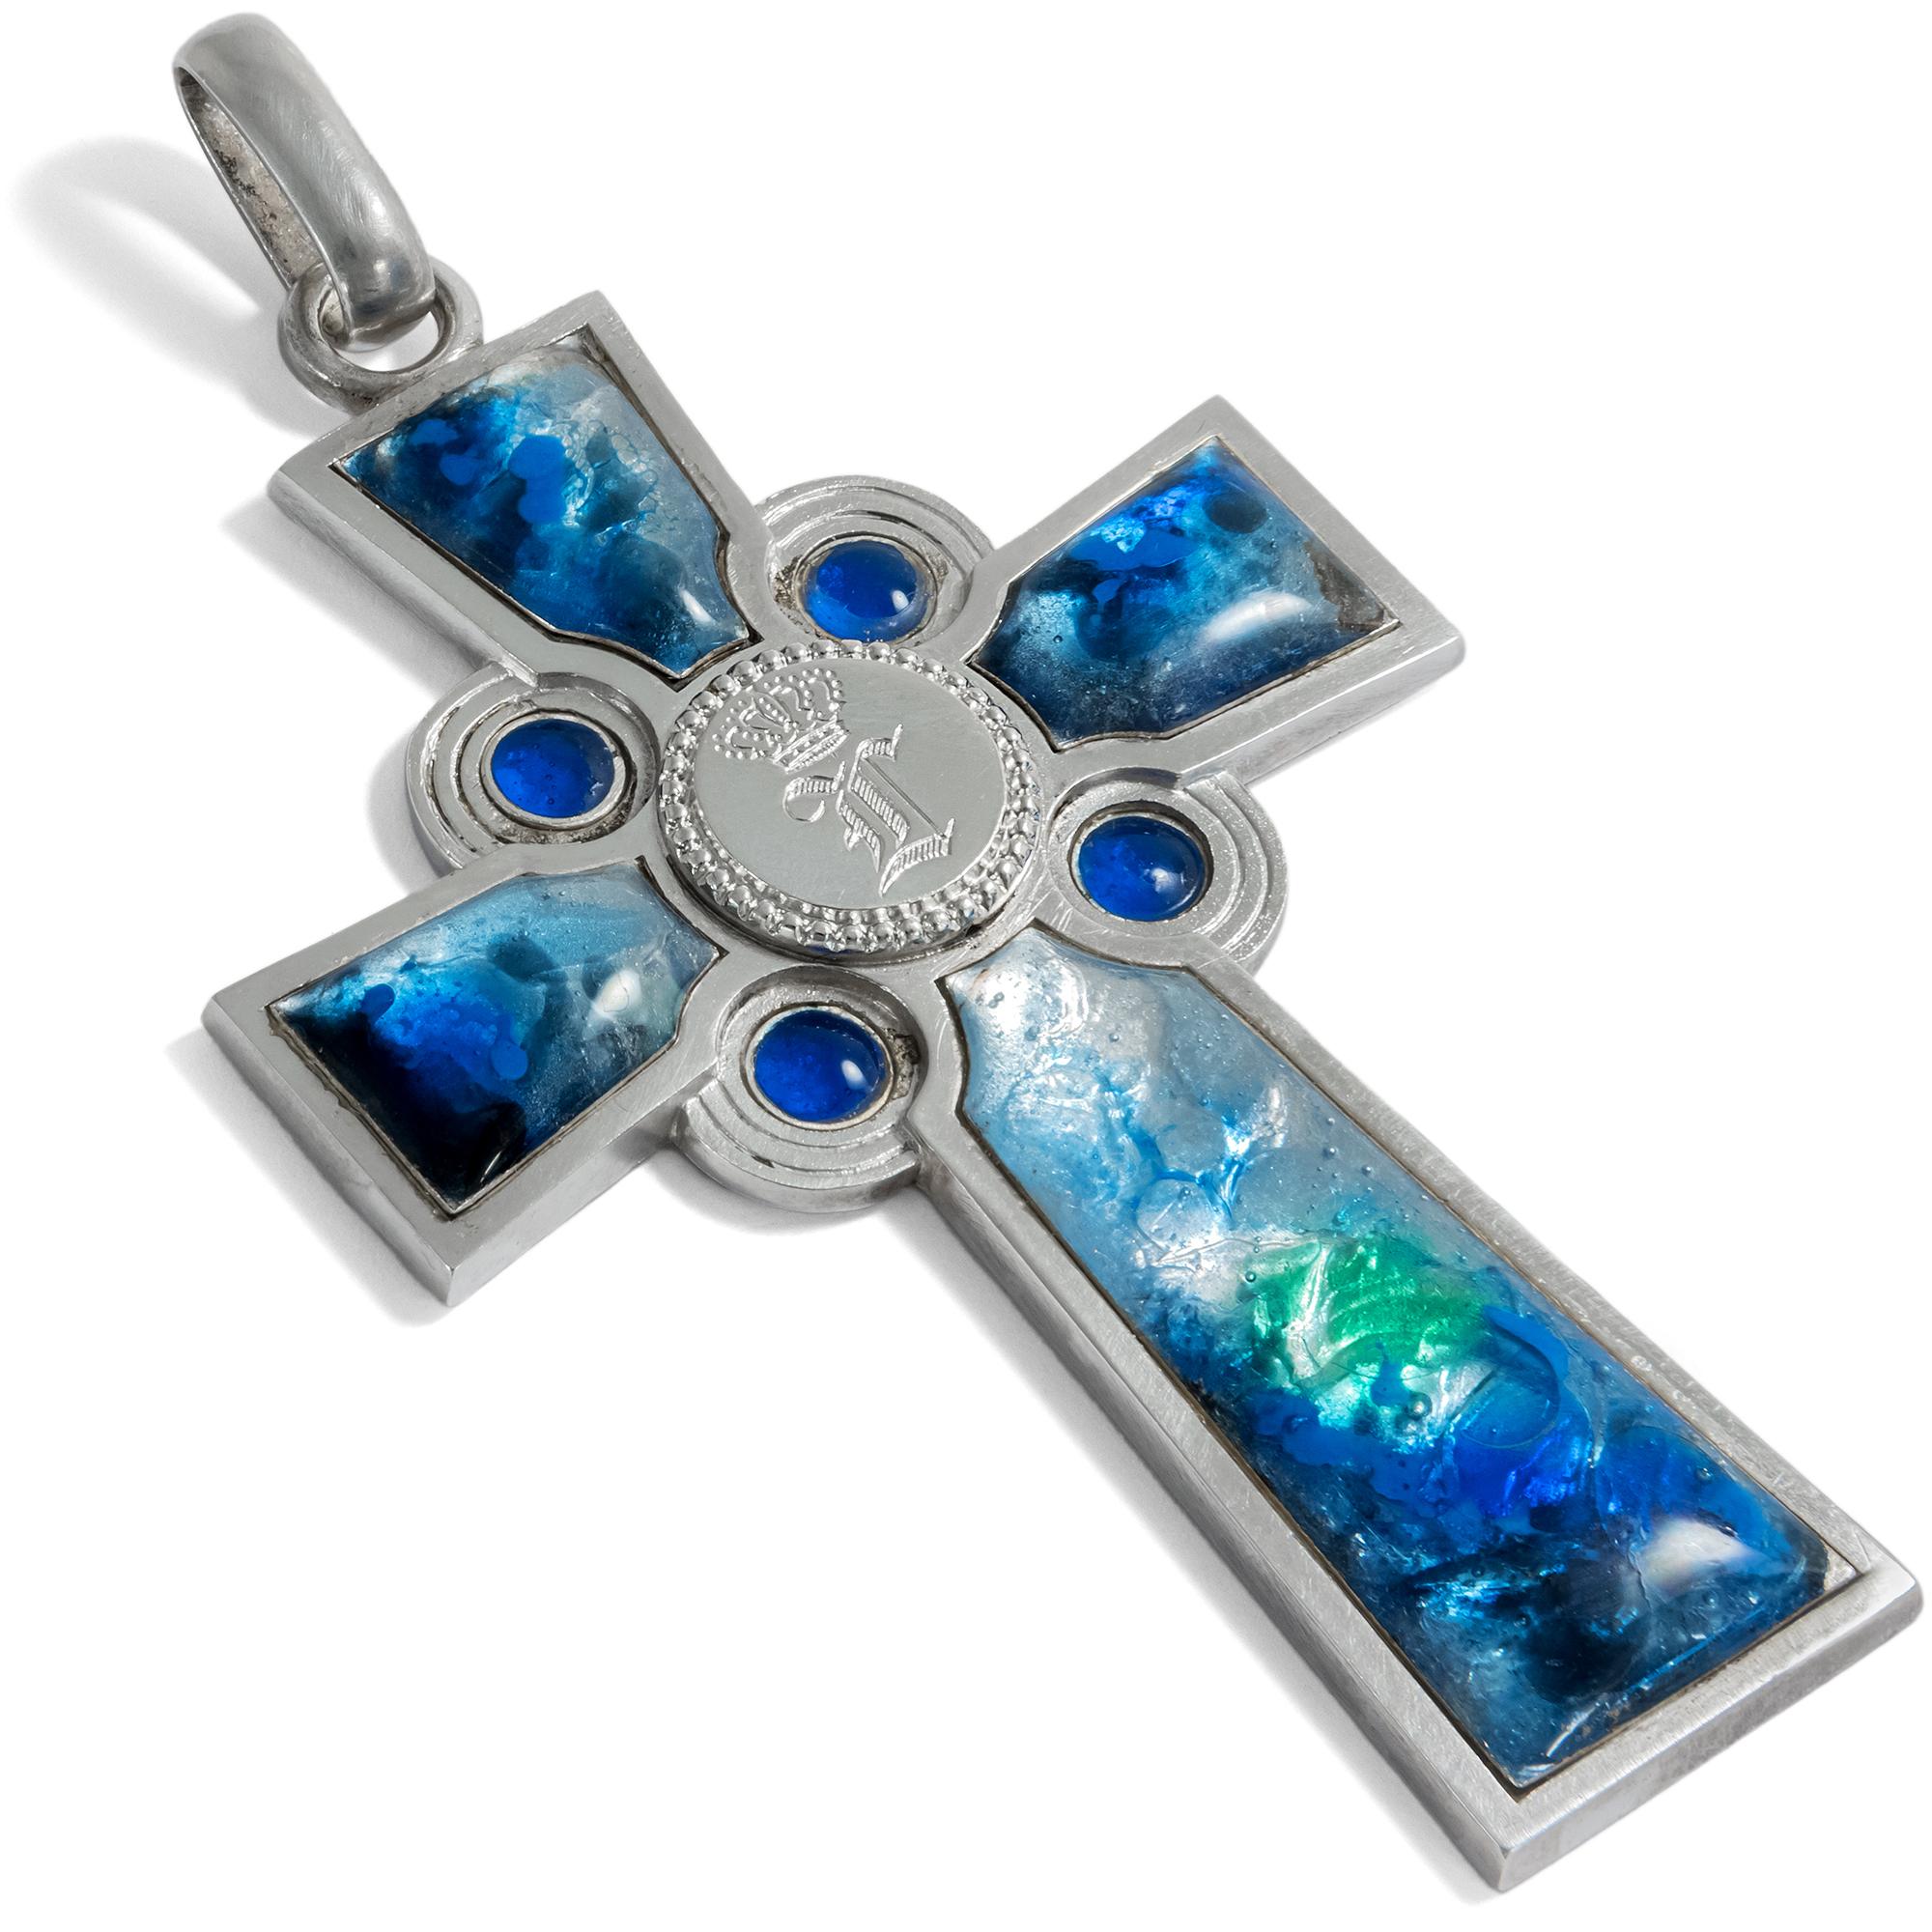 Antique Silver Cross with Enamel Inlays, Germany c. 1910